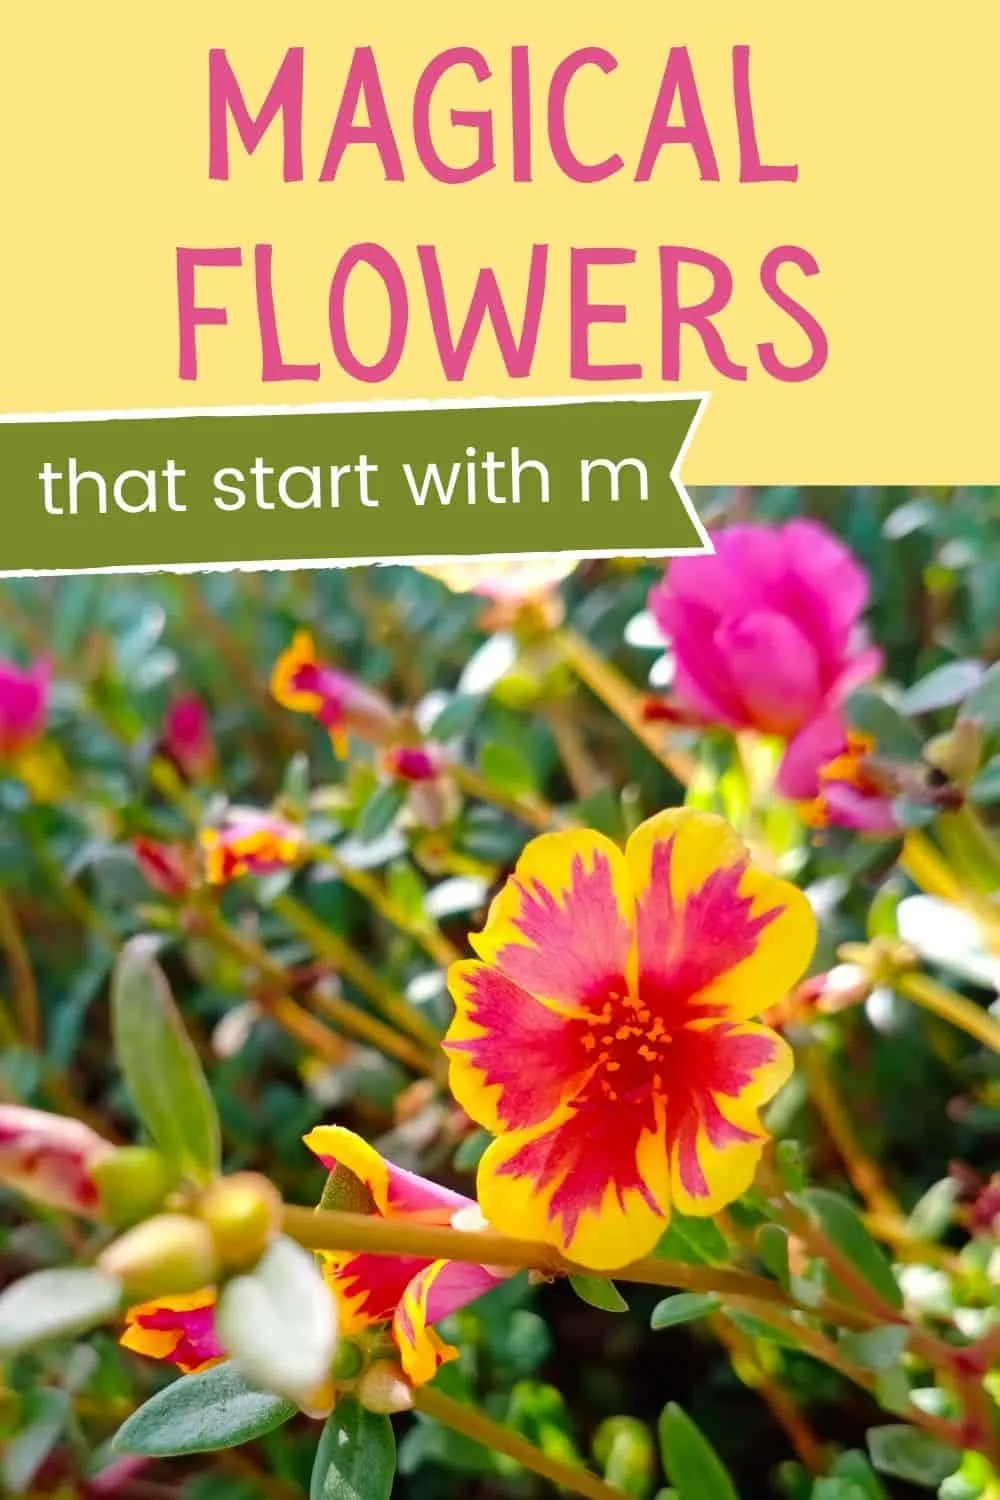 Flowers that start with m